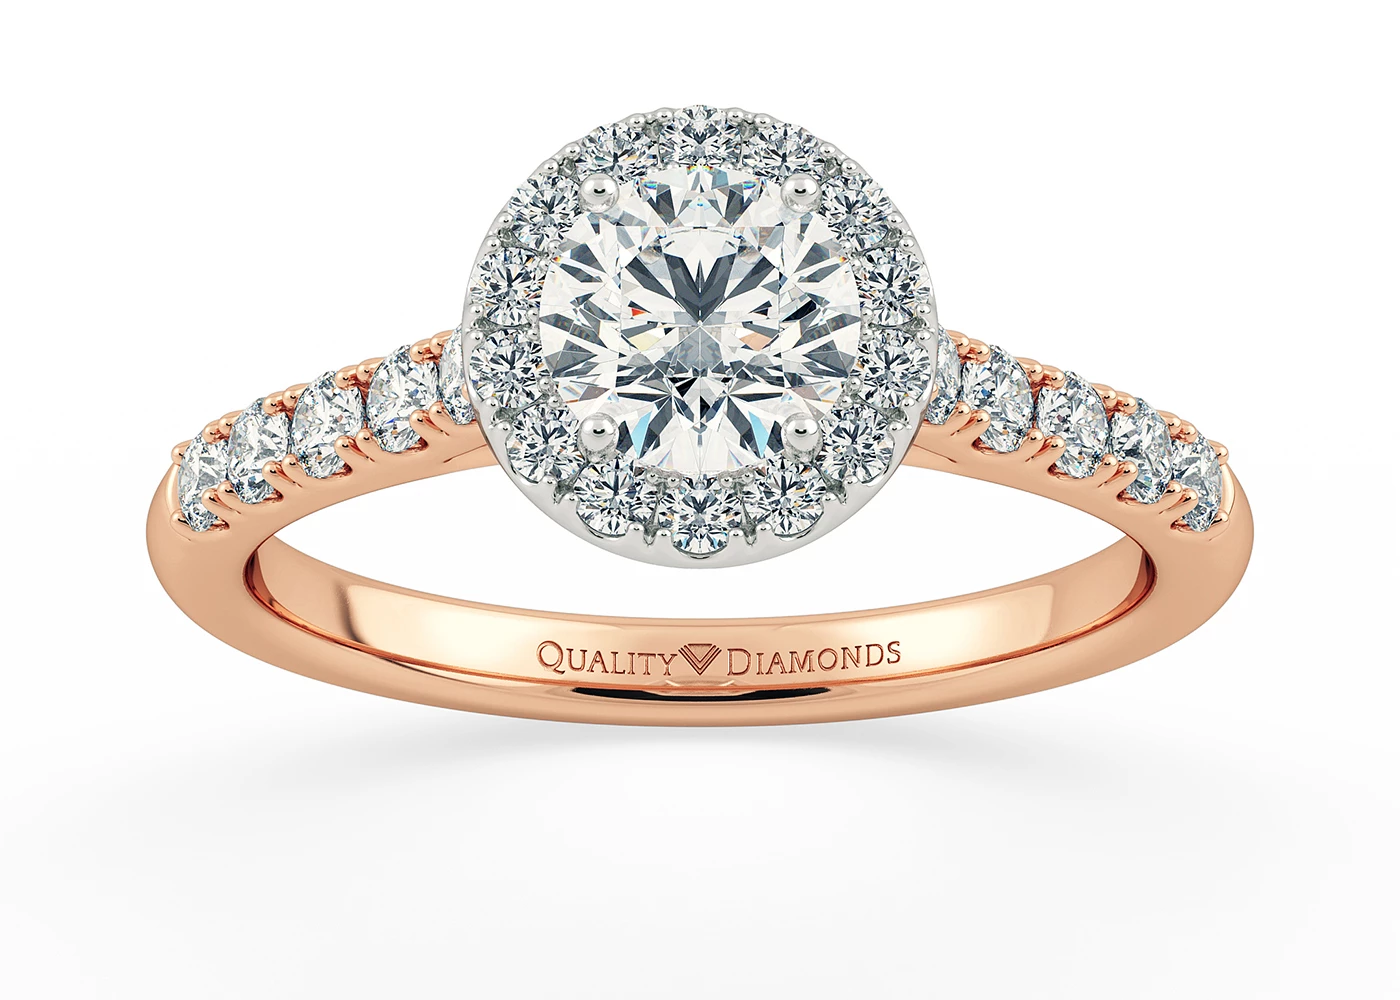 Two Carat Halo Round Brilliant Diamond Ring in 18K Rose Gold